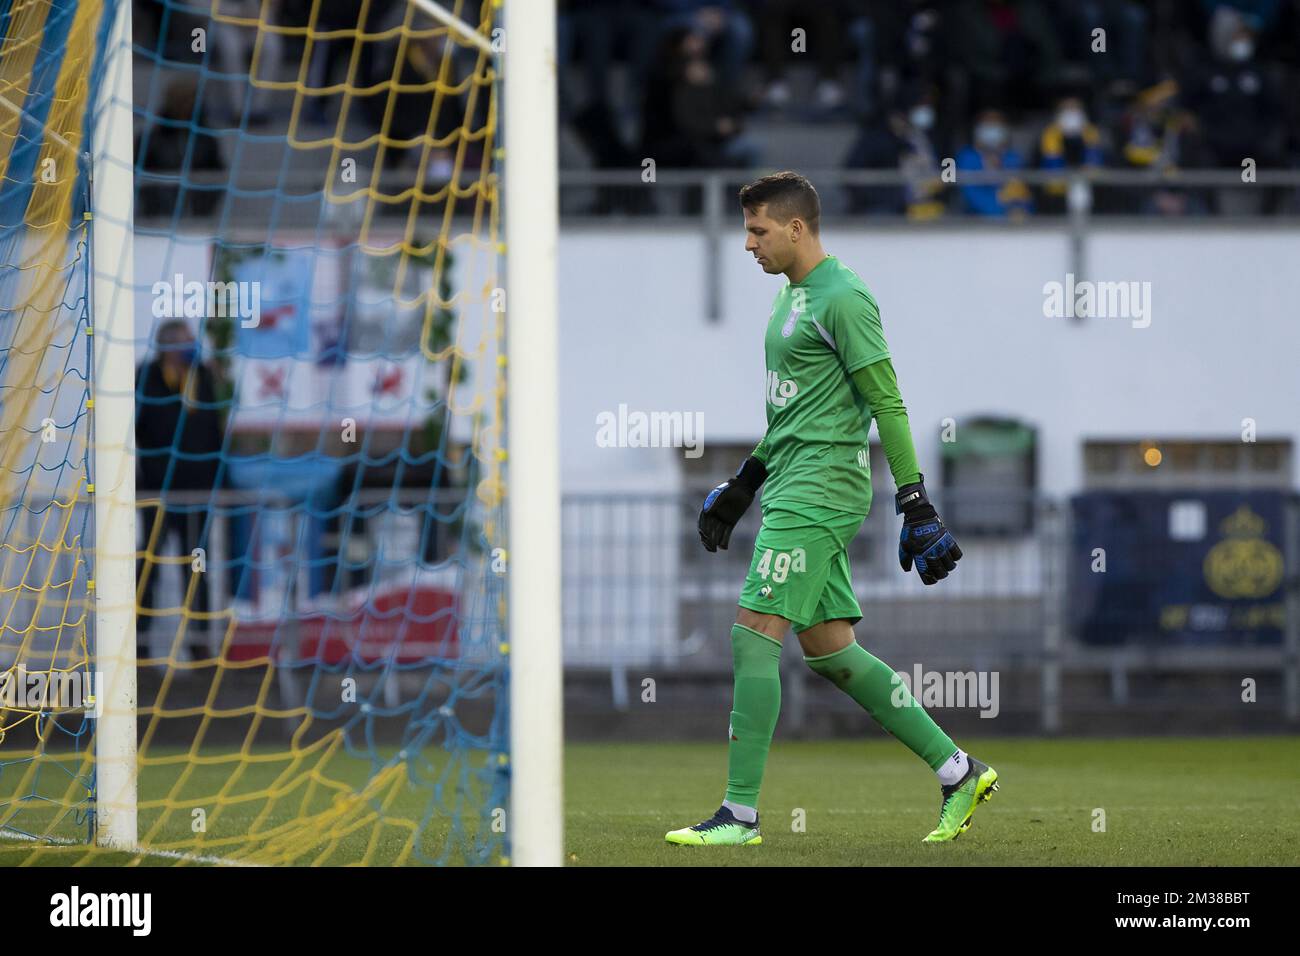 Union's goalkeeper Anthony Moris pictured during a soccer match between Royale Union Saint-Gilloise and Sint-Truidense VV, Sunday 13 February 2022 in Brussels, on day 27 of the 2021-2022 'Jupiler Pro League' first division of the Belgian championship. BELGA PHOTO KRISTOF VAN ACCOM Stock Photo